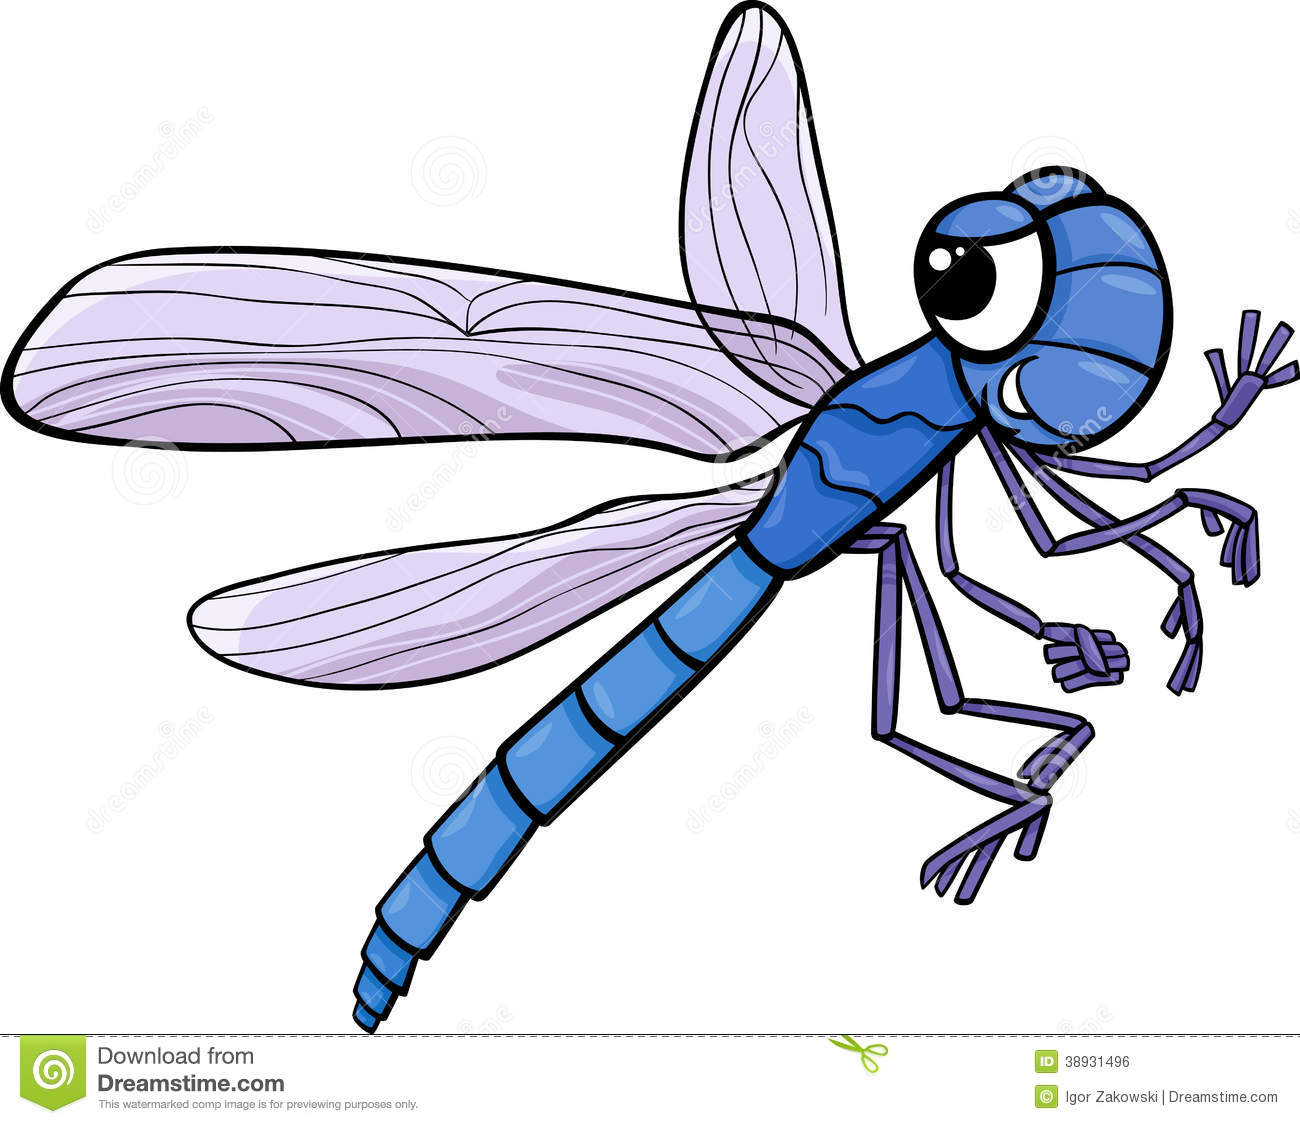 Dragonfly Insect Cartoon Illustration Stock Vector   Image  38931496